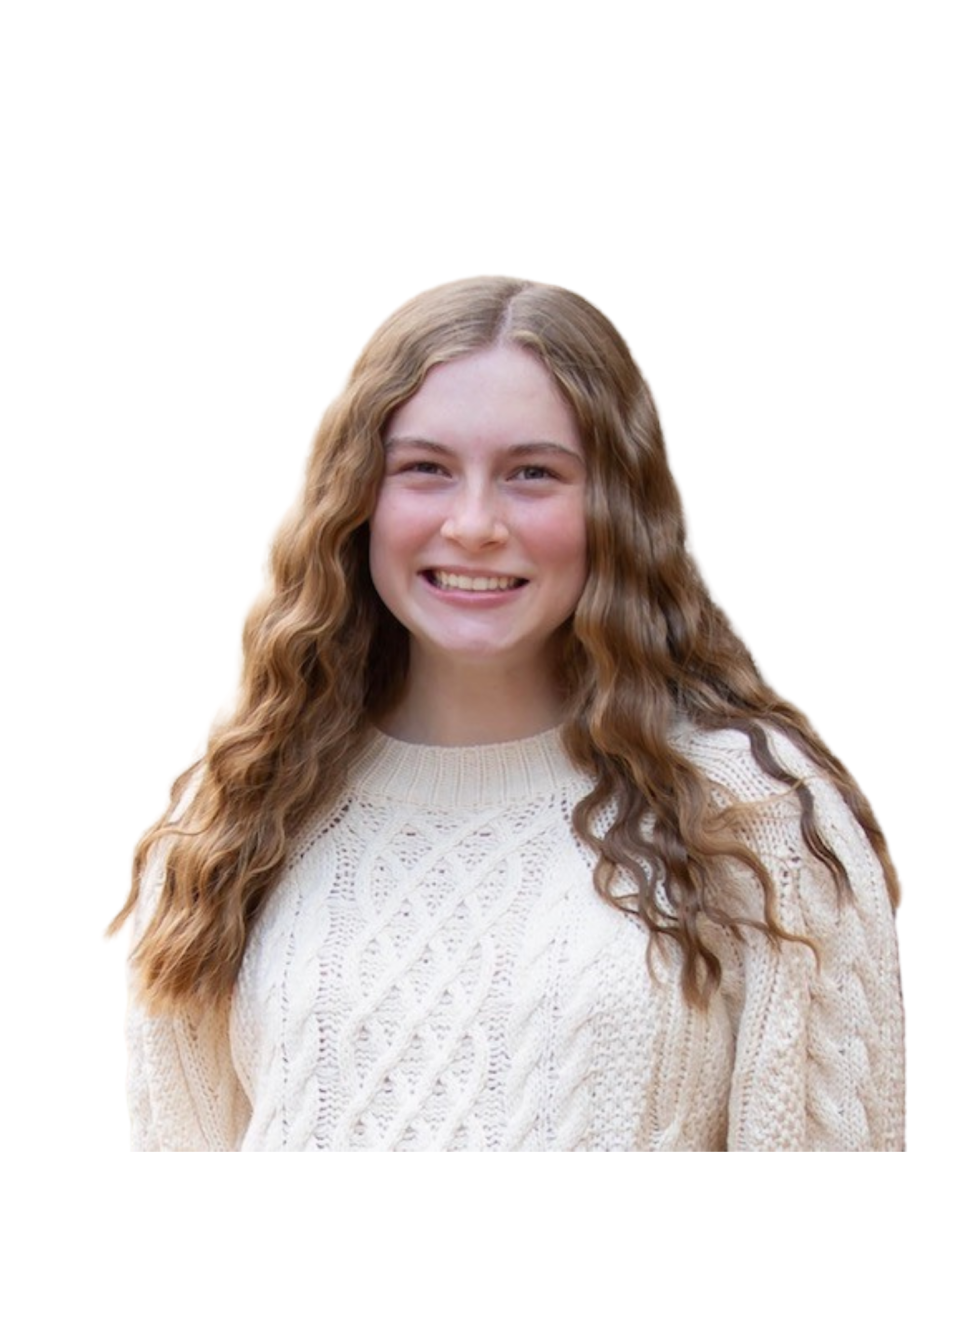 Emily Cochran of Blackhawk High will participate in the Distinguished Young Women of Beaver County program.